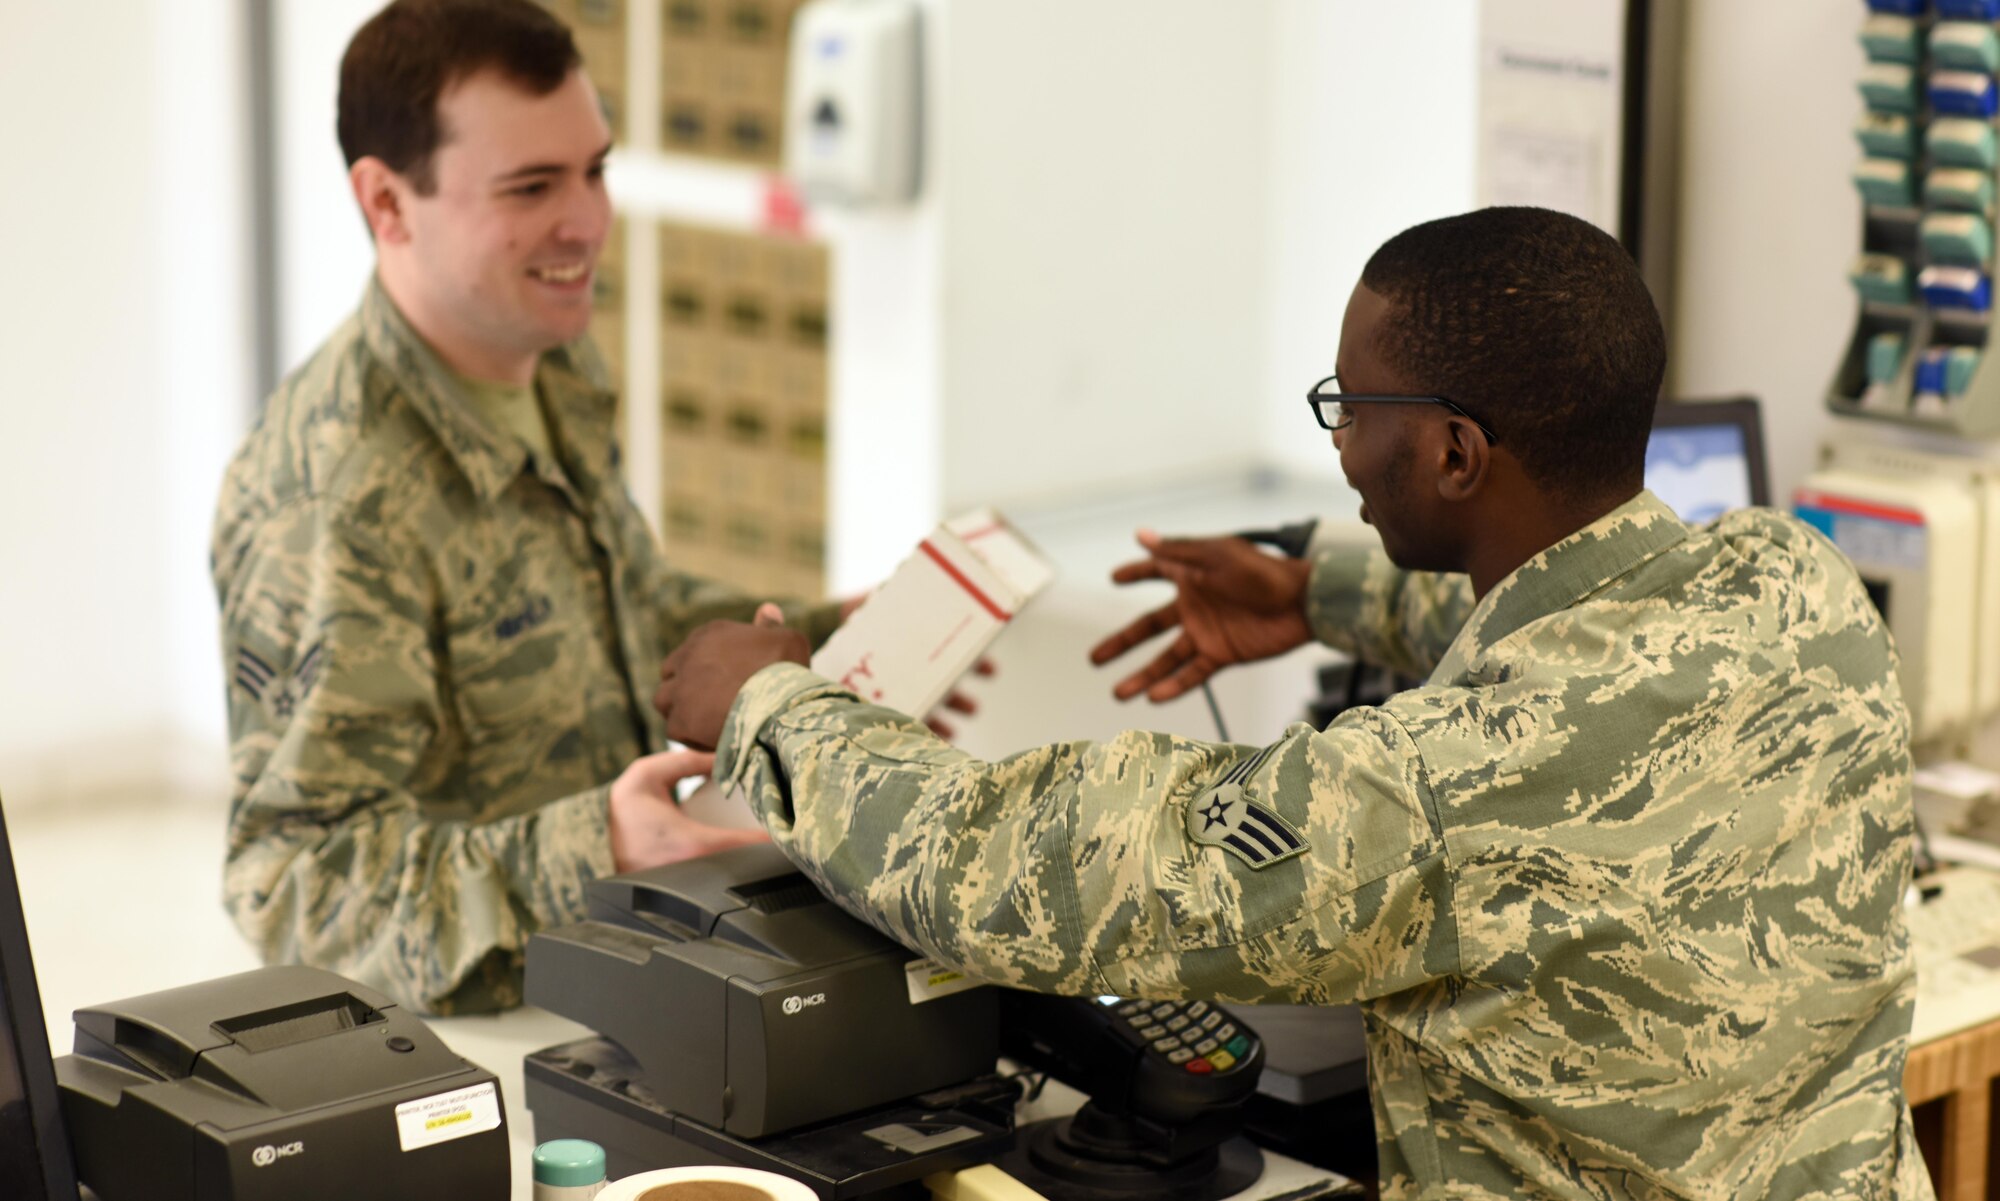 U.S. Air Force Senior Airman Jamal Jenkins, a postal clerk with the 379th Expeditionary Communications Squadron post office, processes a package at Al Udeid Air Base, Qatar, Jan. 19, 2016. These Airmen work day and night to process incoming and outgoing mail. (U.S. Air Force photo by Senior Airman Cynthia A. Innocenti)